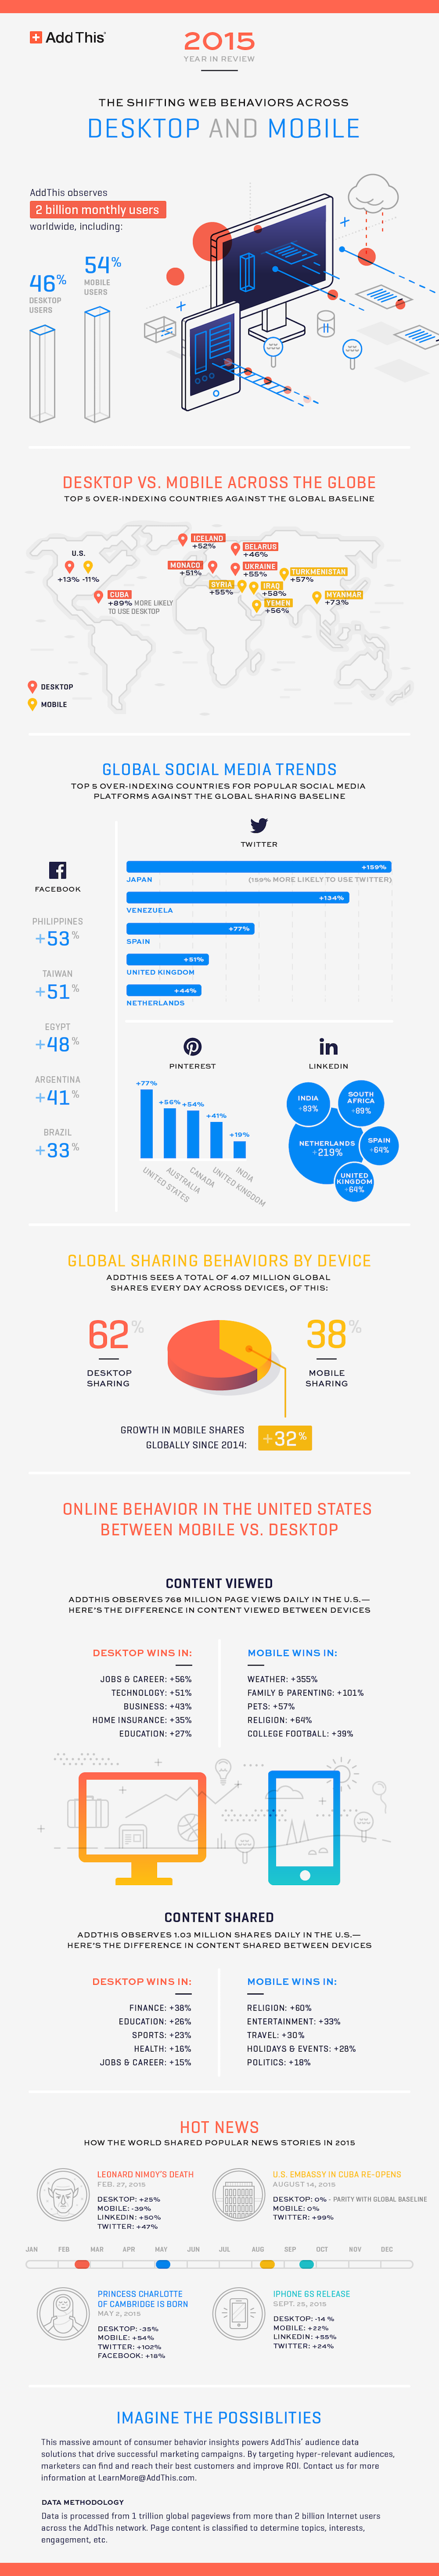 AddThis-2015-EOY-Infographic-2